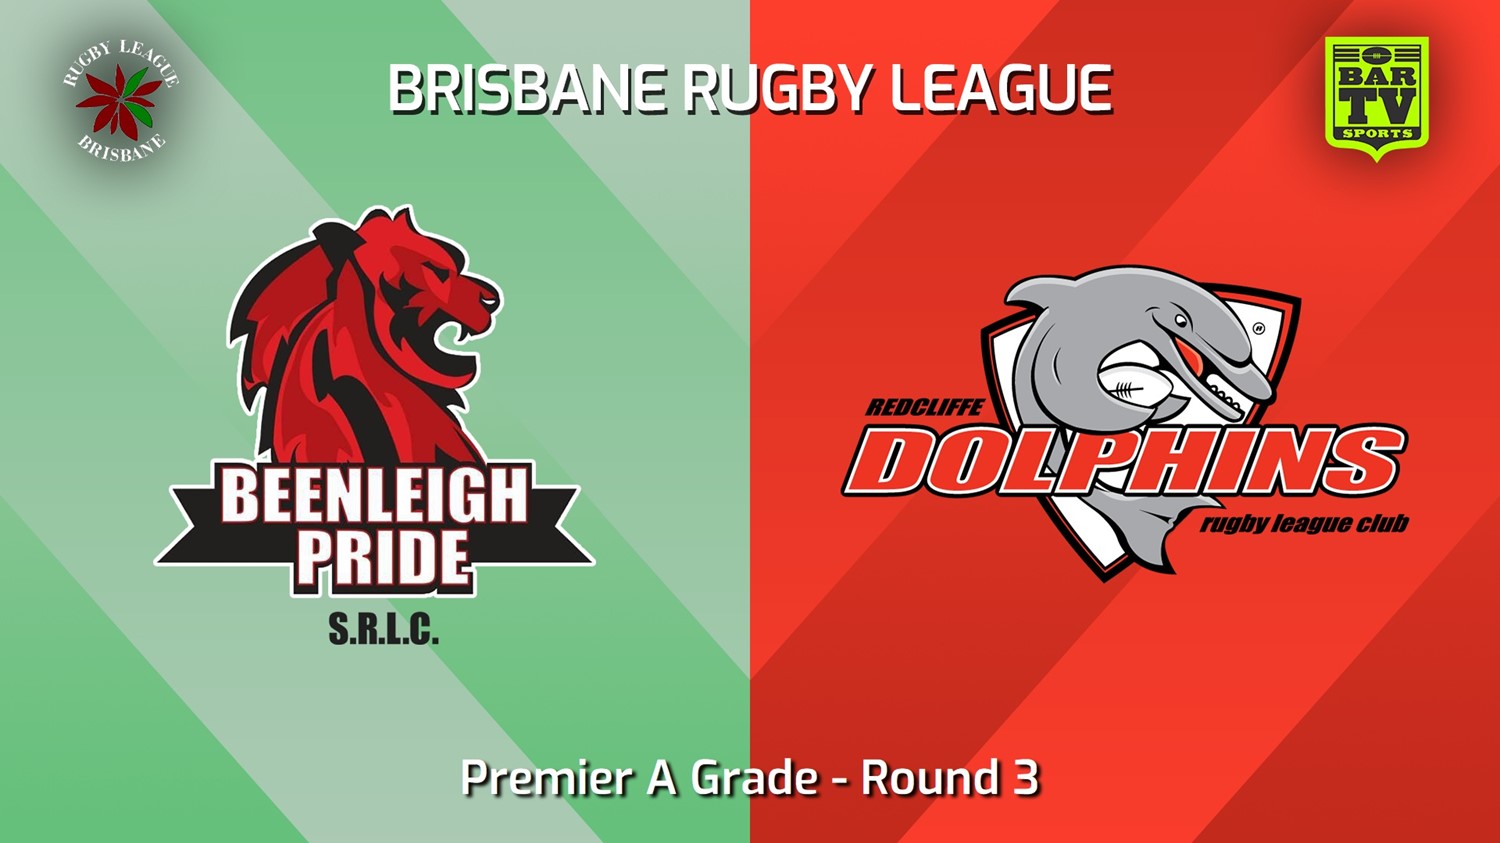 240420-video-BRL Round 3 - Premier A Grade - Beenleigh Pride v Redcliffe Dolphins Slate Image